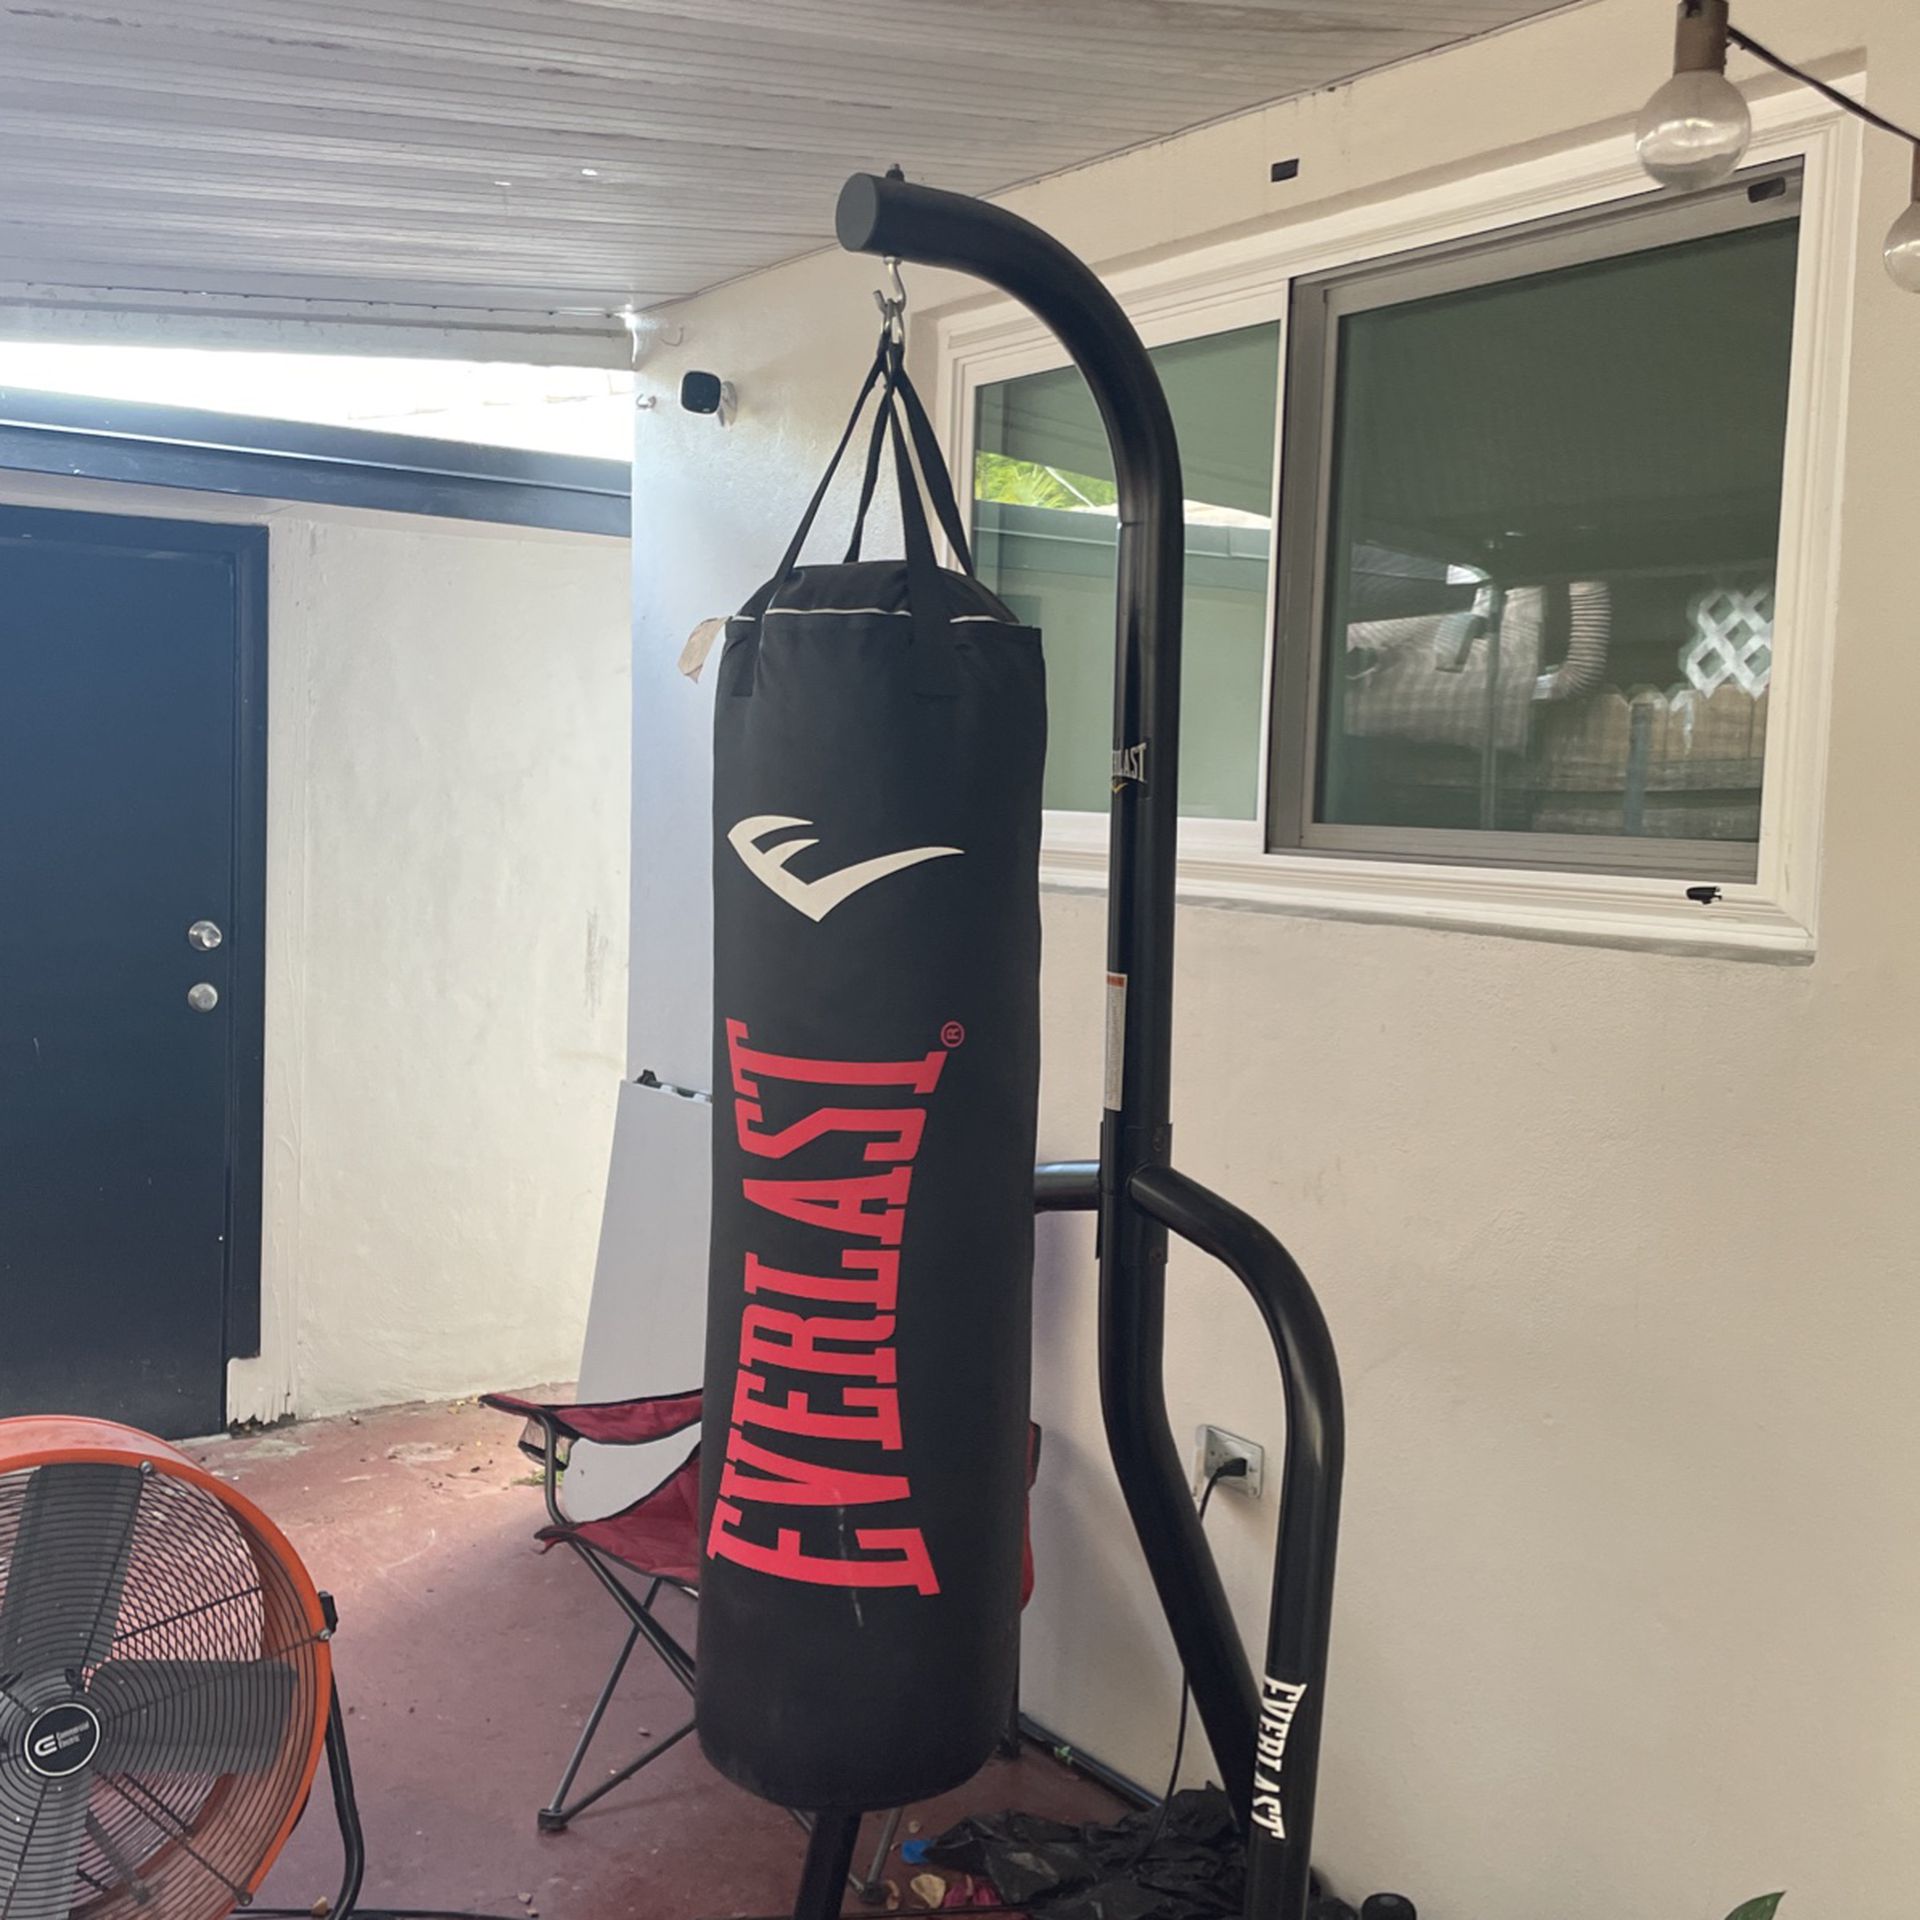 Everlast NevaTear 70 Pound Hanging Heavy Punching Bag with Powder Coated Steel Heavy Bag Stand for MMA and Boxing Training, Black